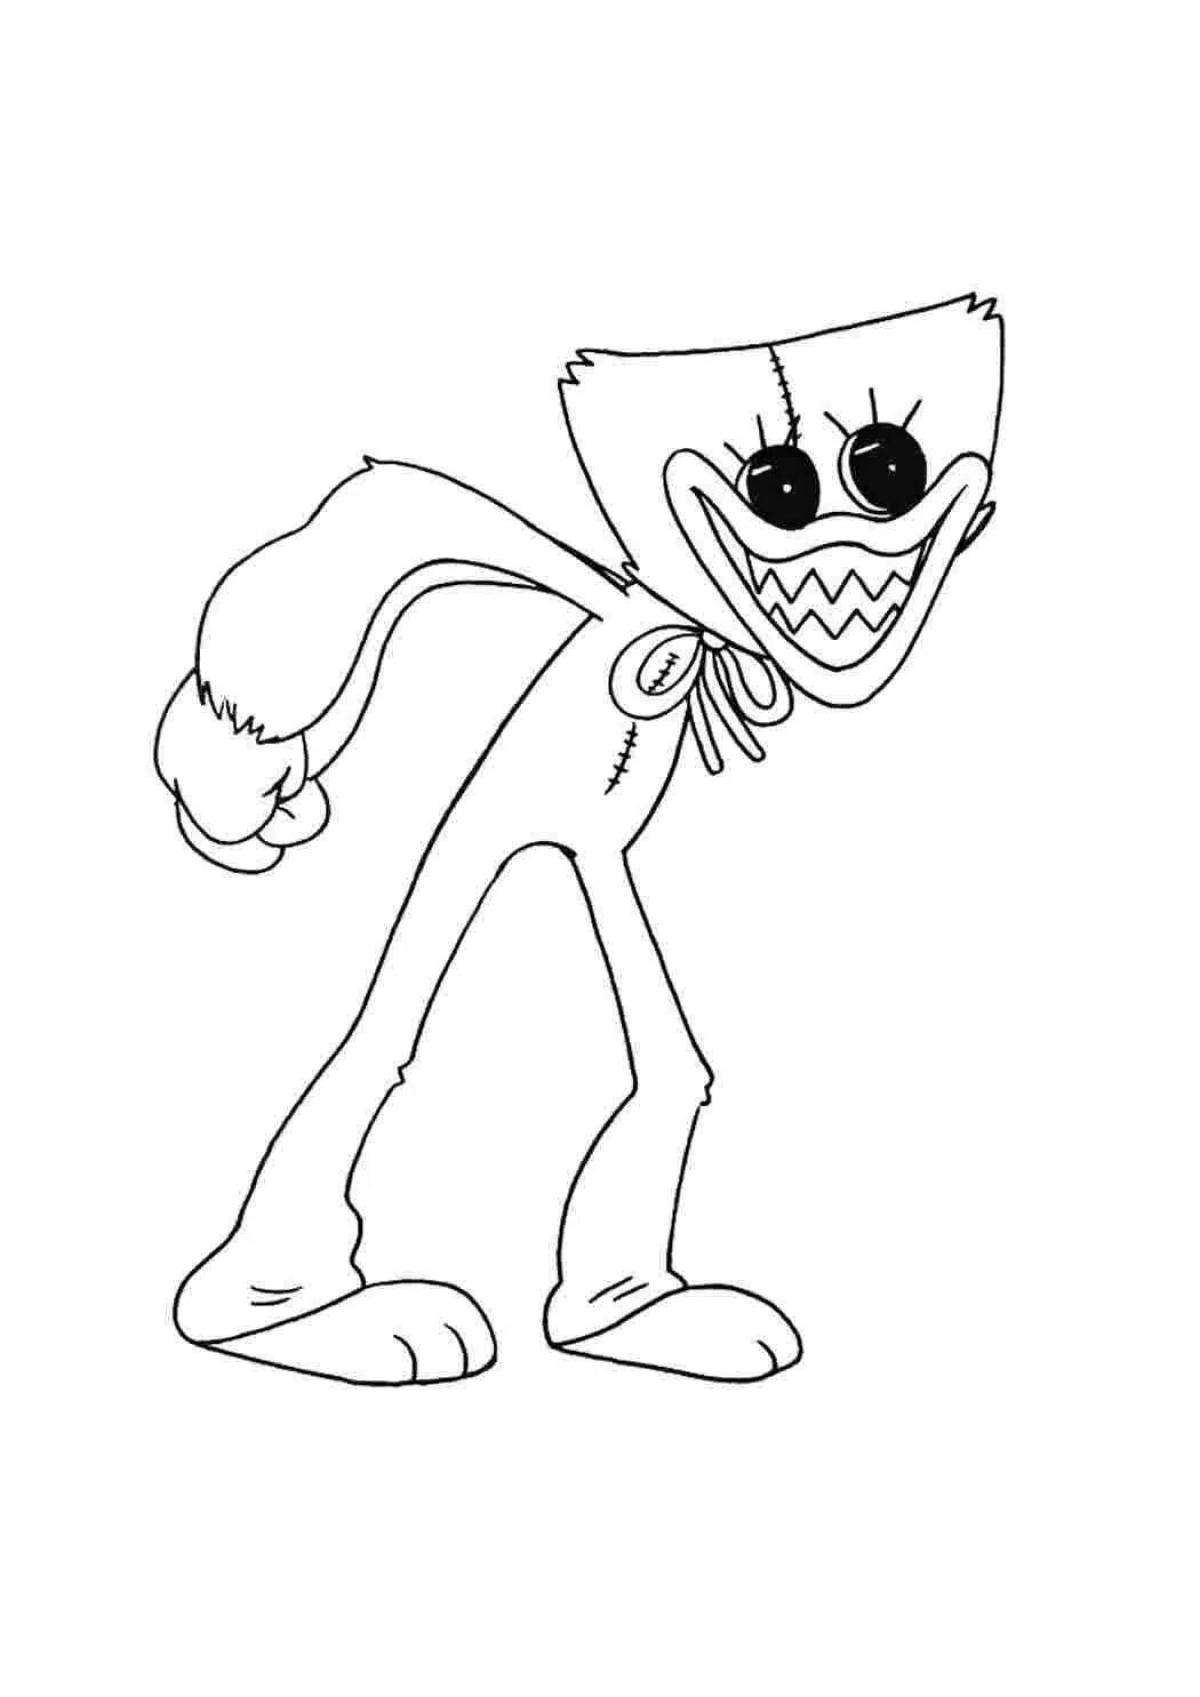 Radiant haggy waggie coloring page